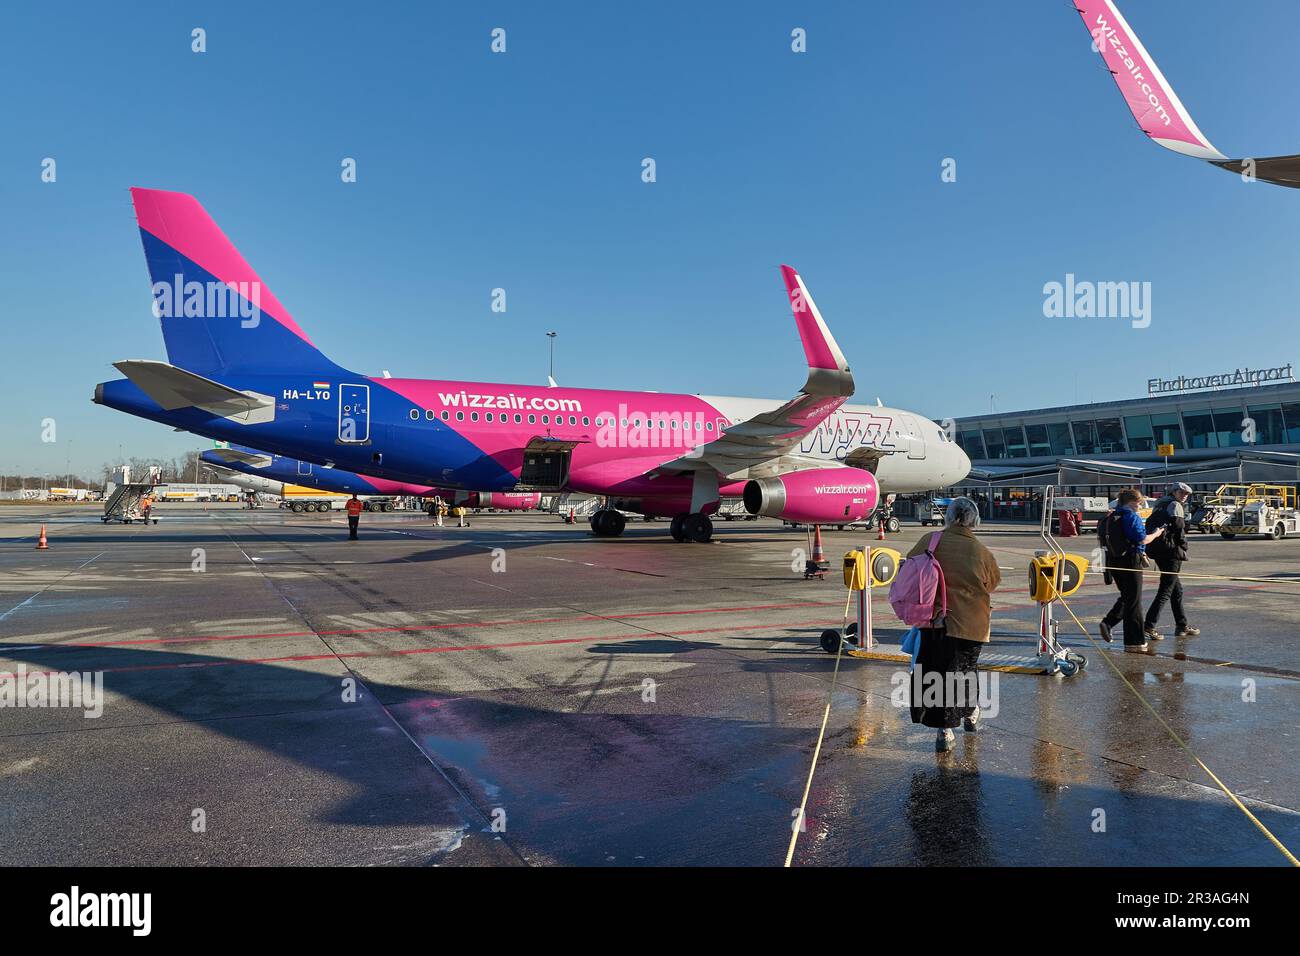 Wizzair airplane at Eindhoven Airport Stock Photo